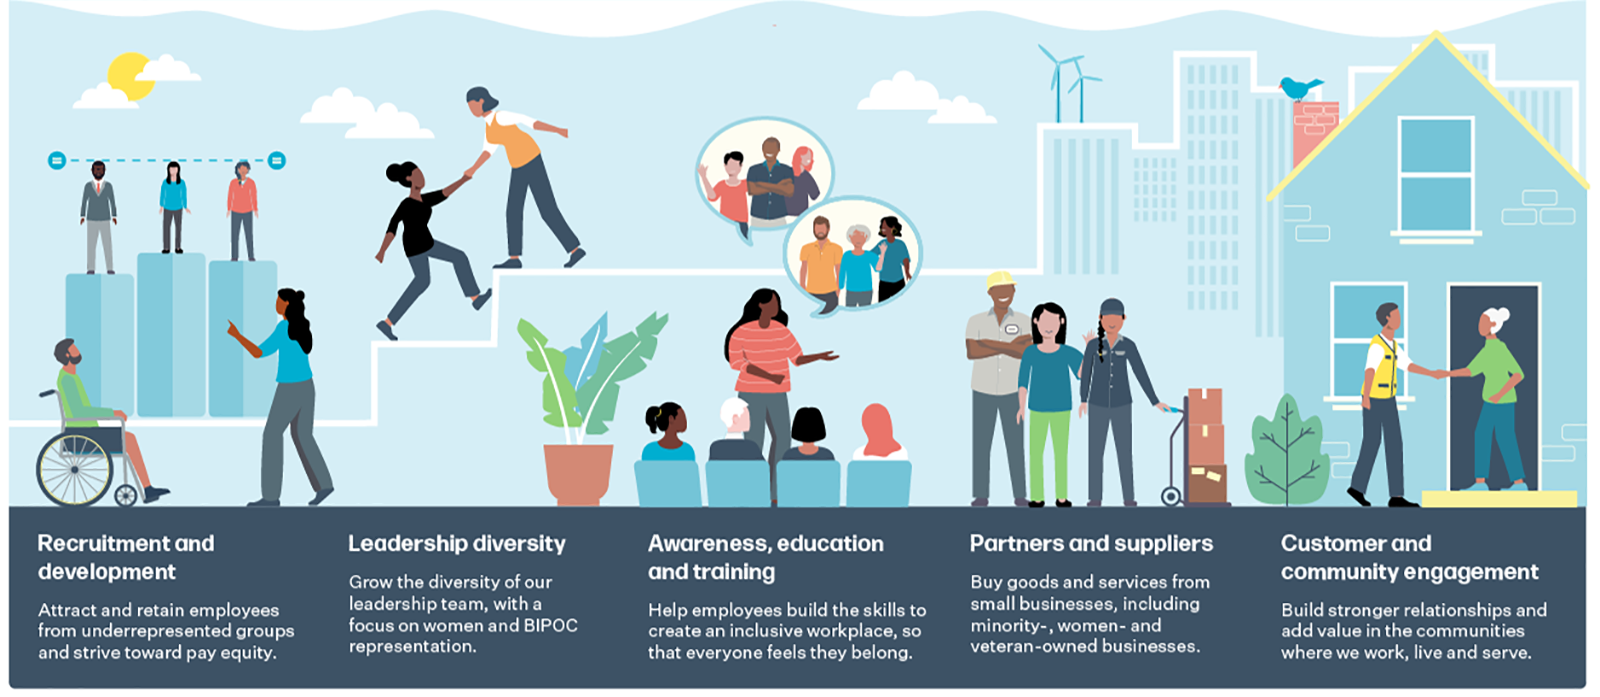 Infographic that descripts diversity and inclusion at Portland General Electric in Oregon. Graphic includes a diverse mix of people within our community and text on the graphic says: 
Recruitment and development: Attract and retain employees from underrepresented groups and strive toward pay equity.

Leadership diversity: Grow the diversity of our leadership team, with a focus on women and BIPOC representation.

Awareness, education and training: Help employees build the skills to create an inclusive workplace, so that everyone feels they belong.

Partners and suppliers: Buy goods and services from small businesses, including minority-, women-, and veteran-owned businesses.

Customer and community engagement: Build stronger relationships and add value in the communities where we work, live and serve.